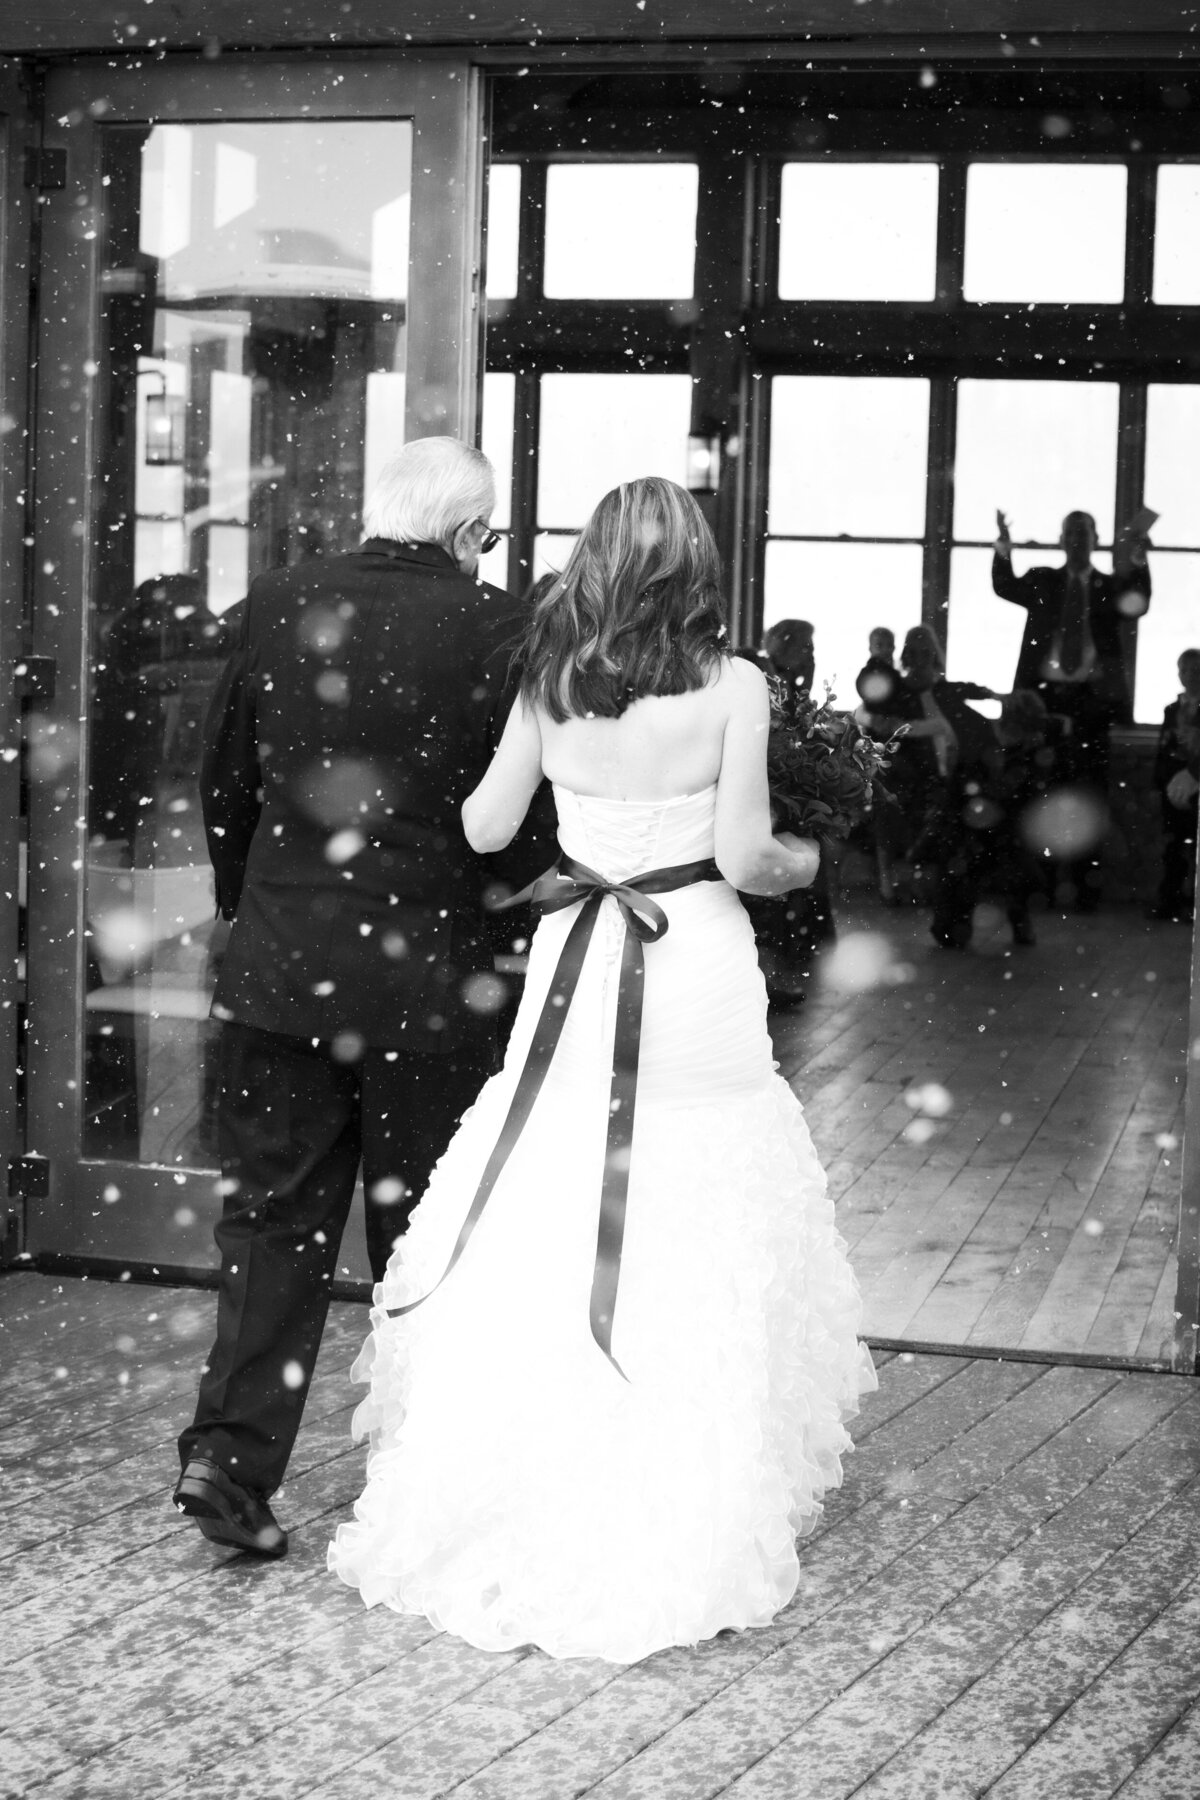 A shot of the bride and her father from behind as they walk up the aisle with snow falling in the foreground.